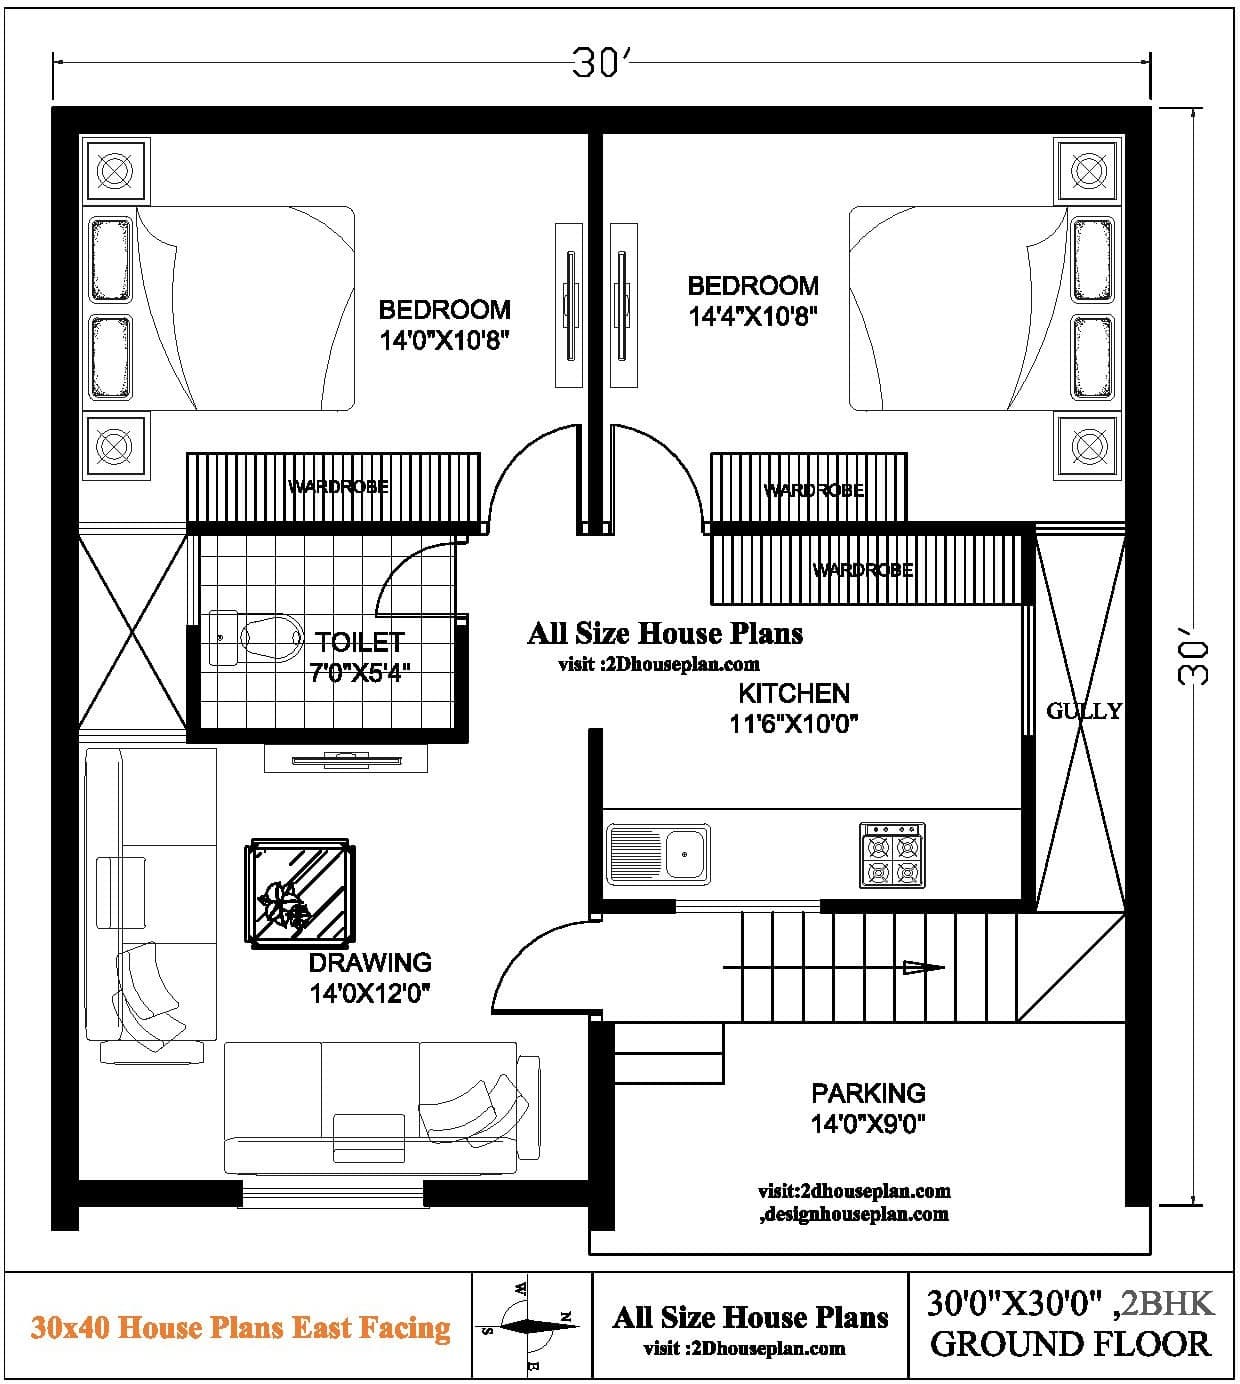 30 by 30 house plan with car parking | Best House Designs